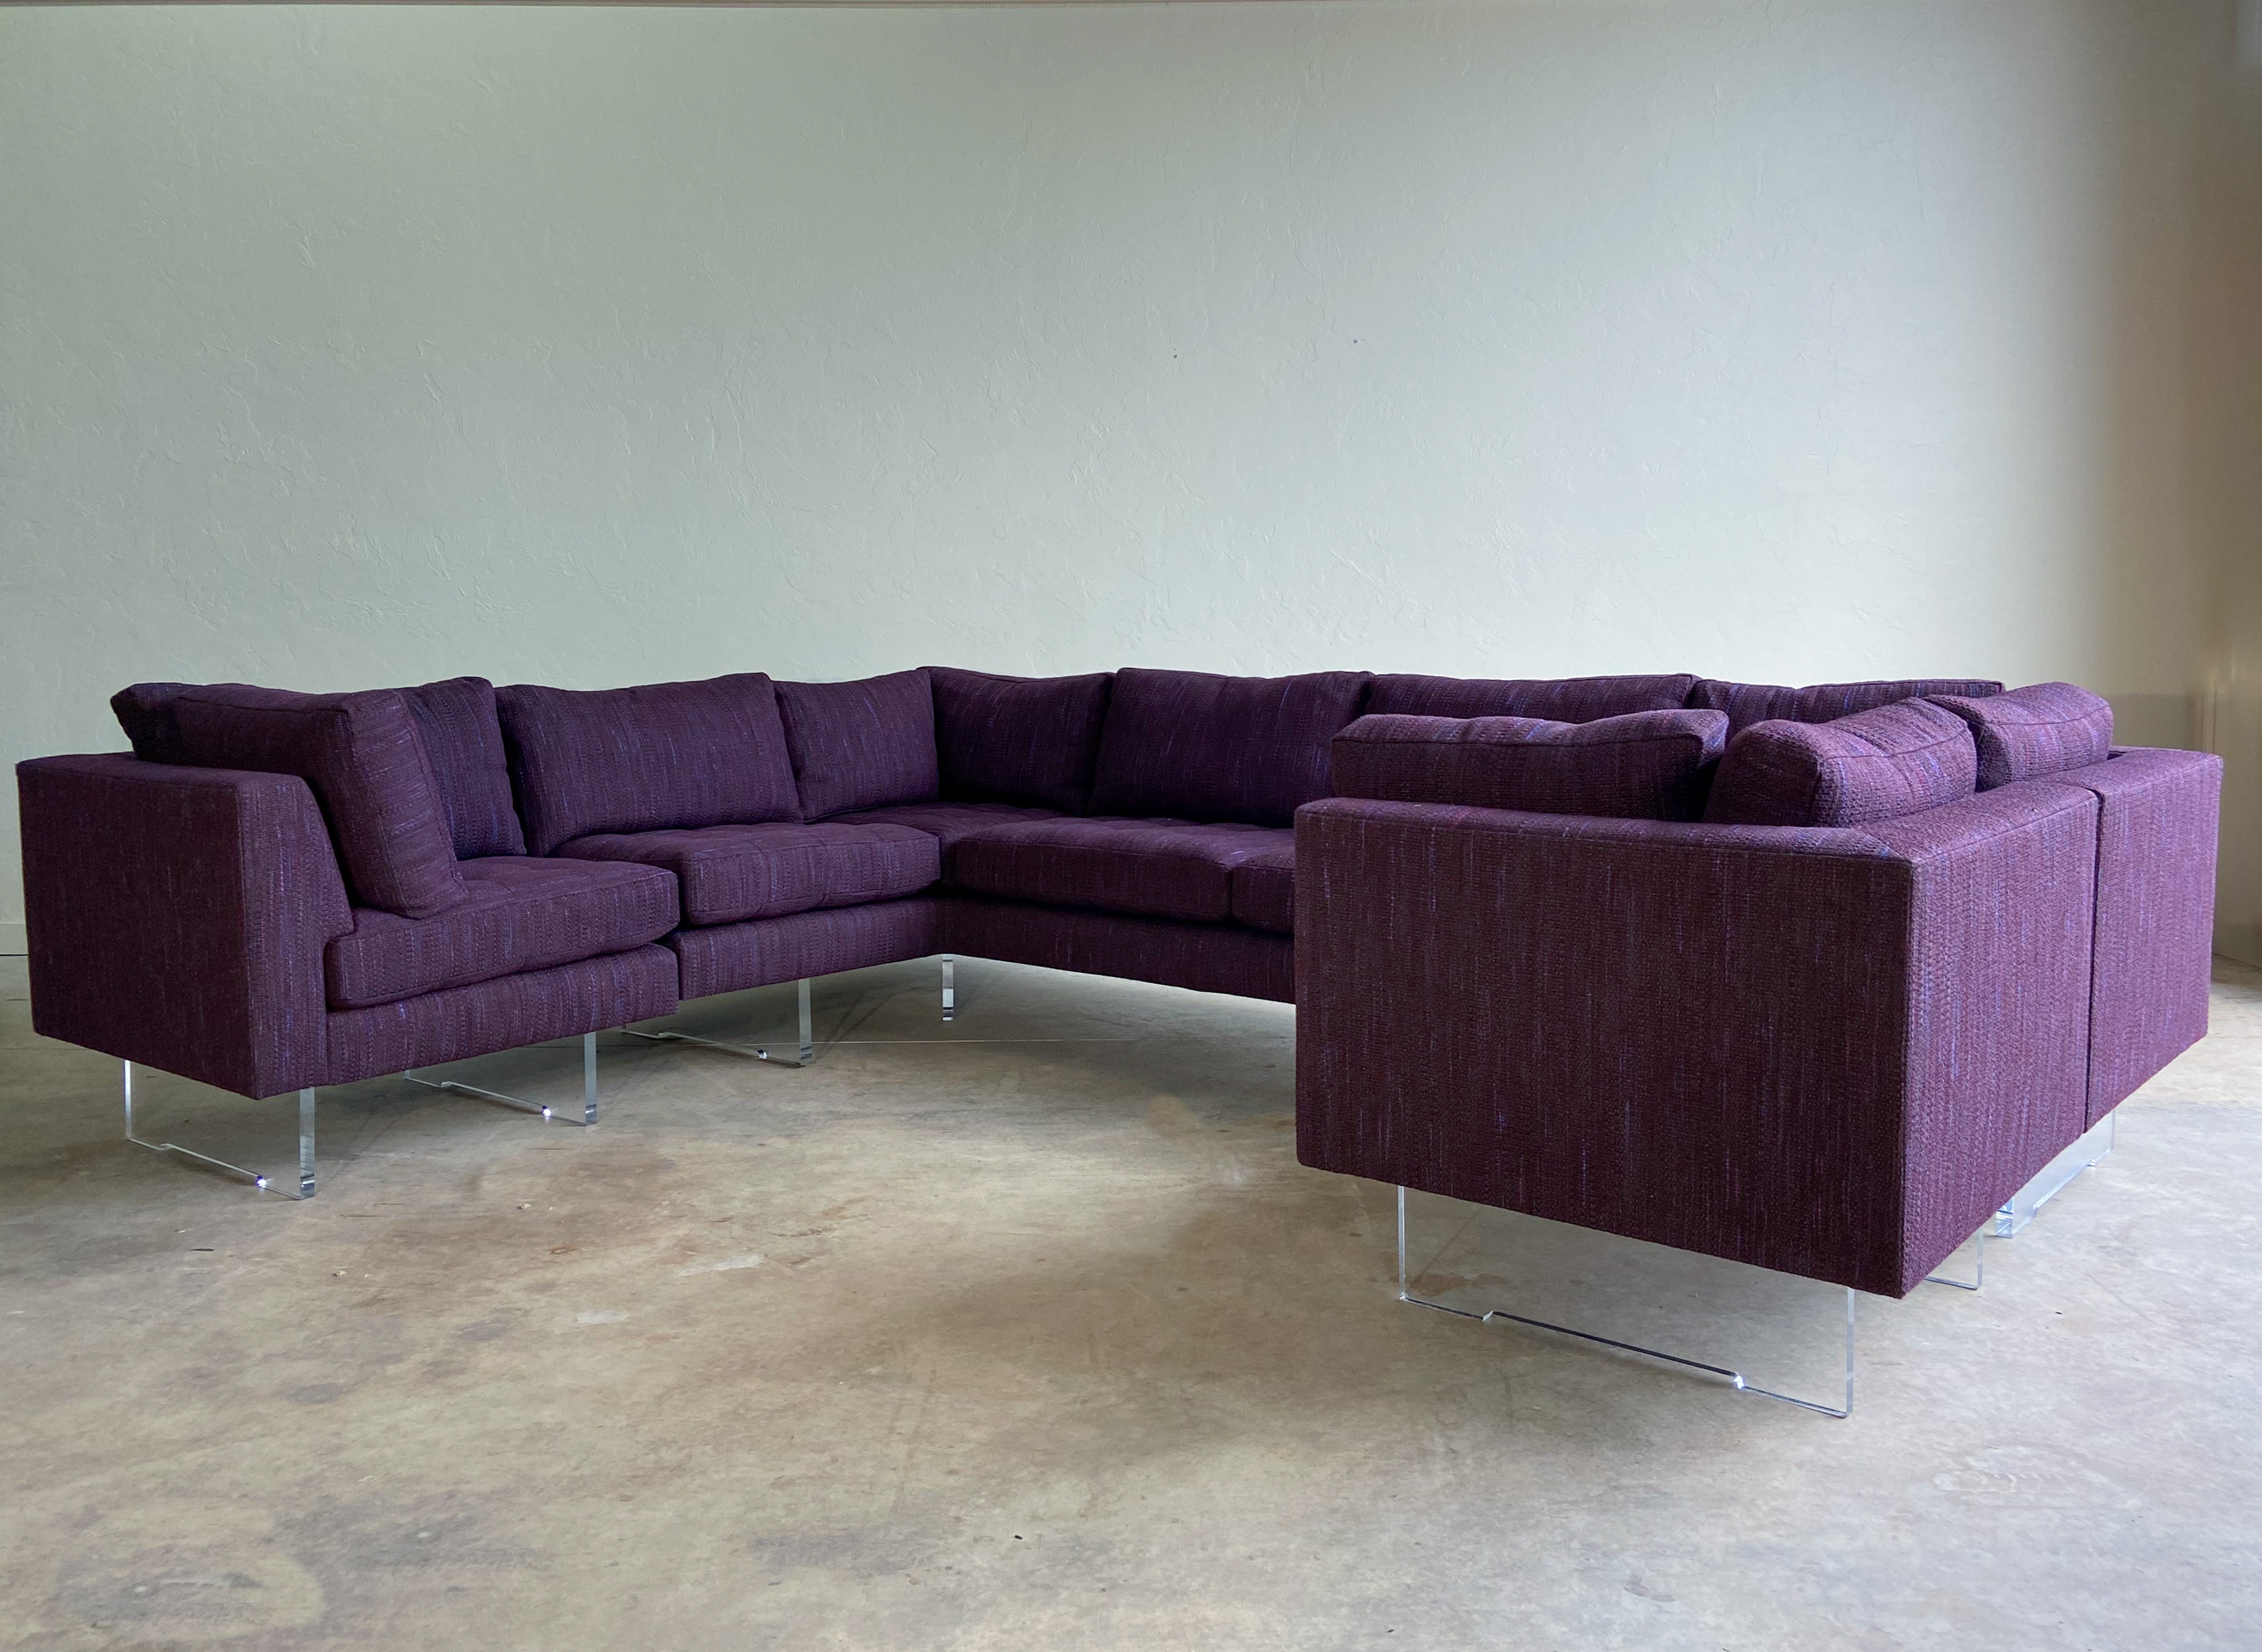 Offered is a custom made sectional sofa by Vladimir Kagan. This was custom ordered by the original owner at a cost of over $40k. 

There are four sections total. They can be arranged as pictured, or can be configured as one larger sofa and